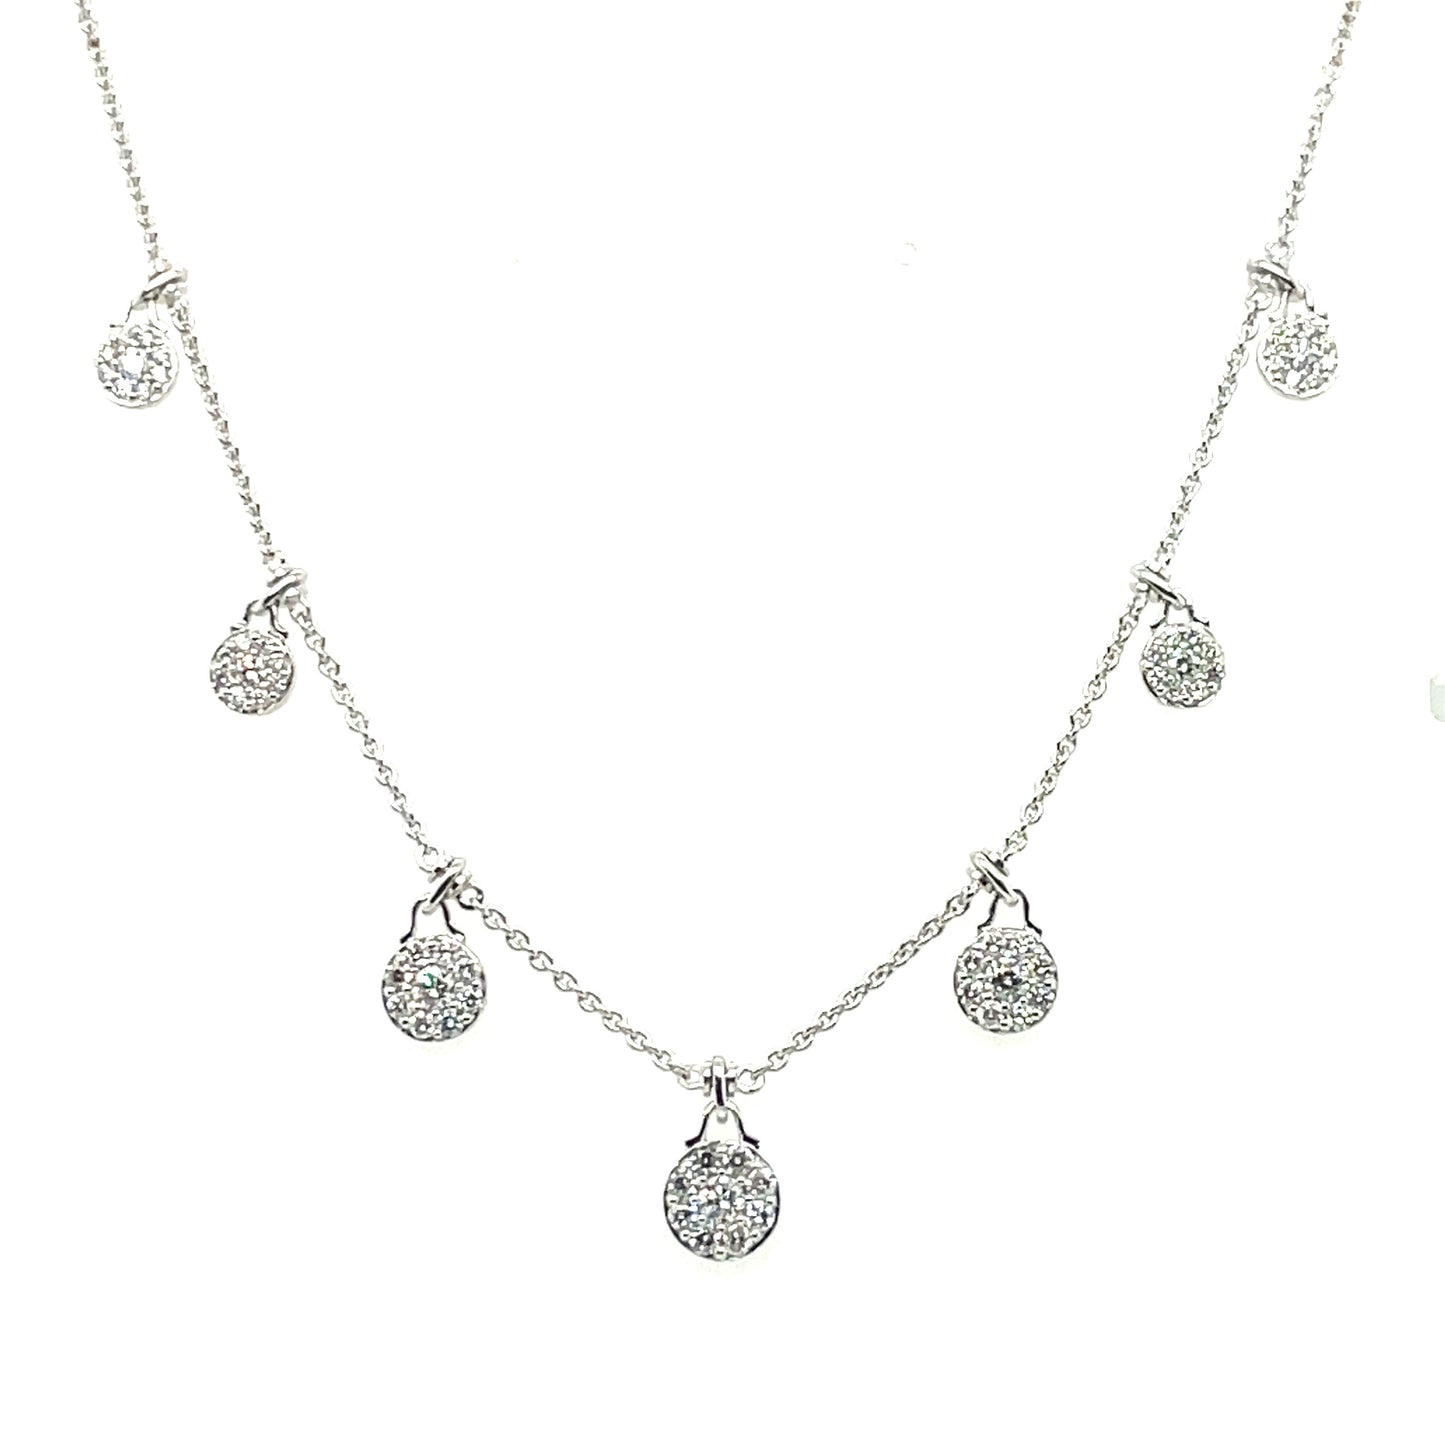 LADY'S 18K WHITE GOLD NECKLACE WITH SEVEN PAVE SET STATIONS